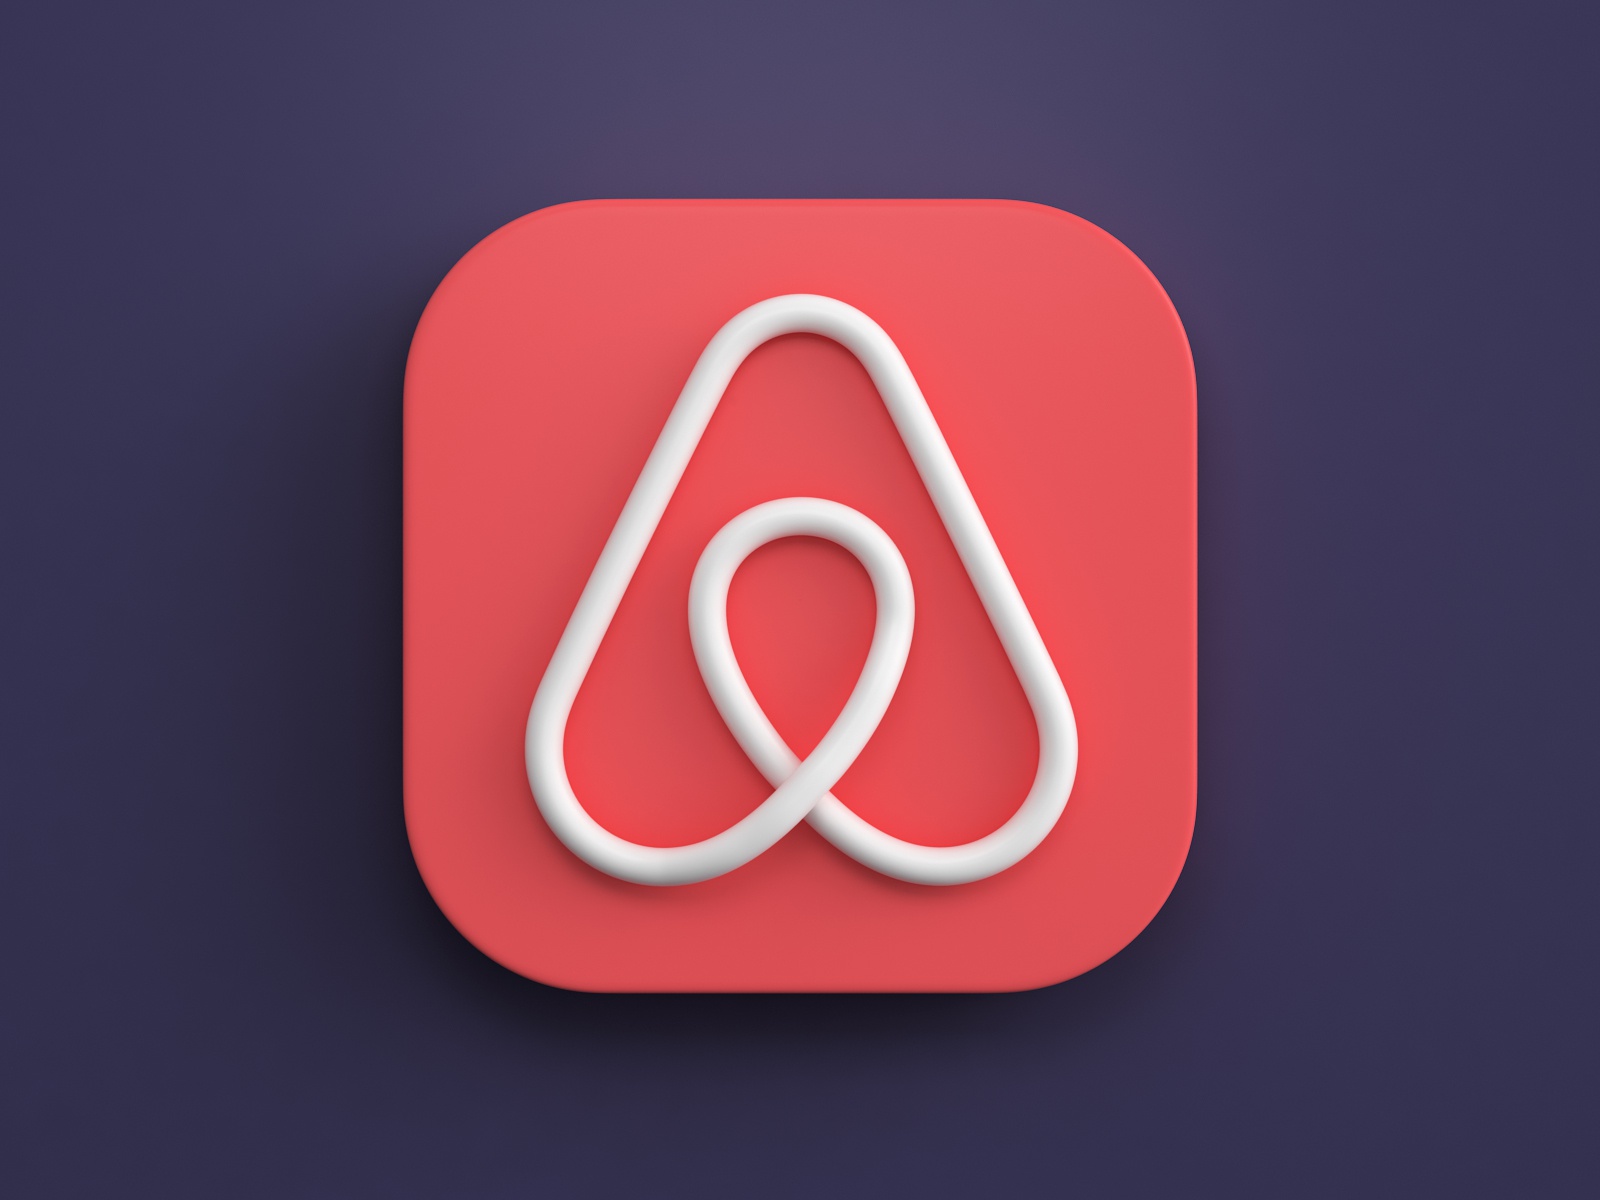 Airbnb 3d icon